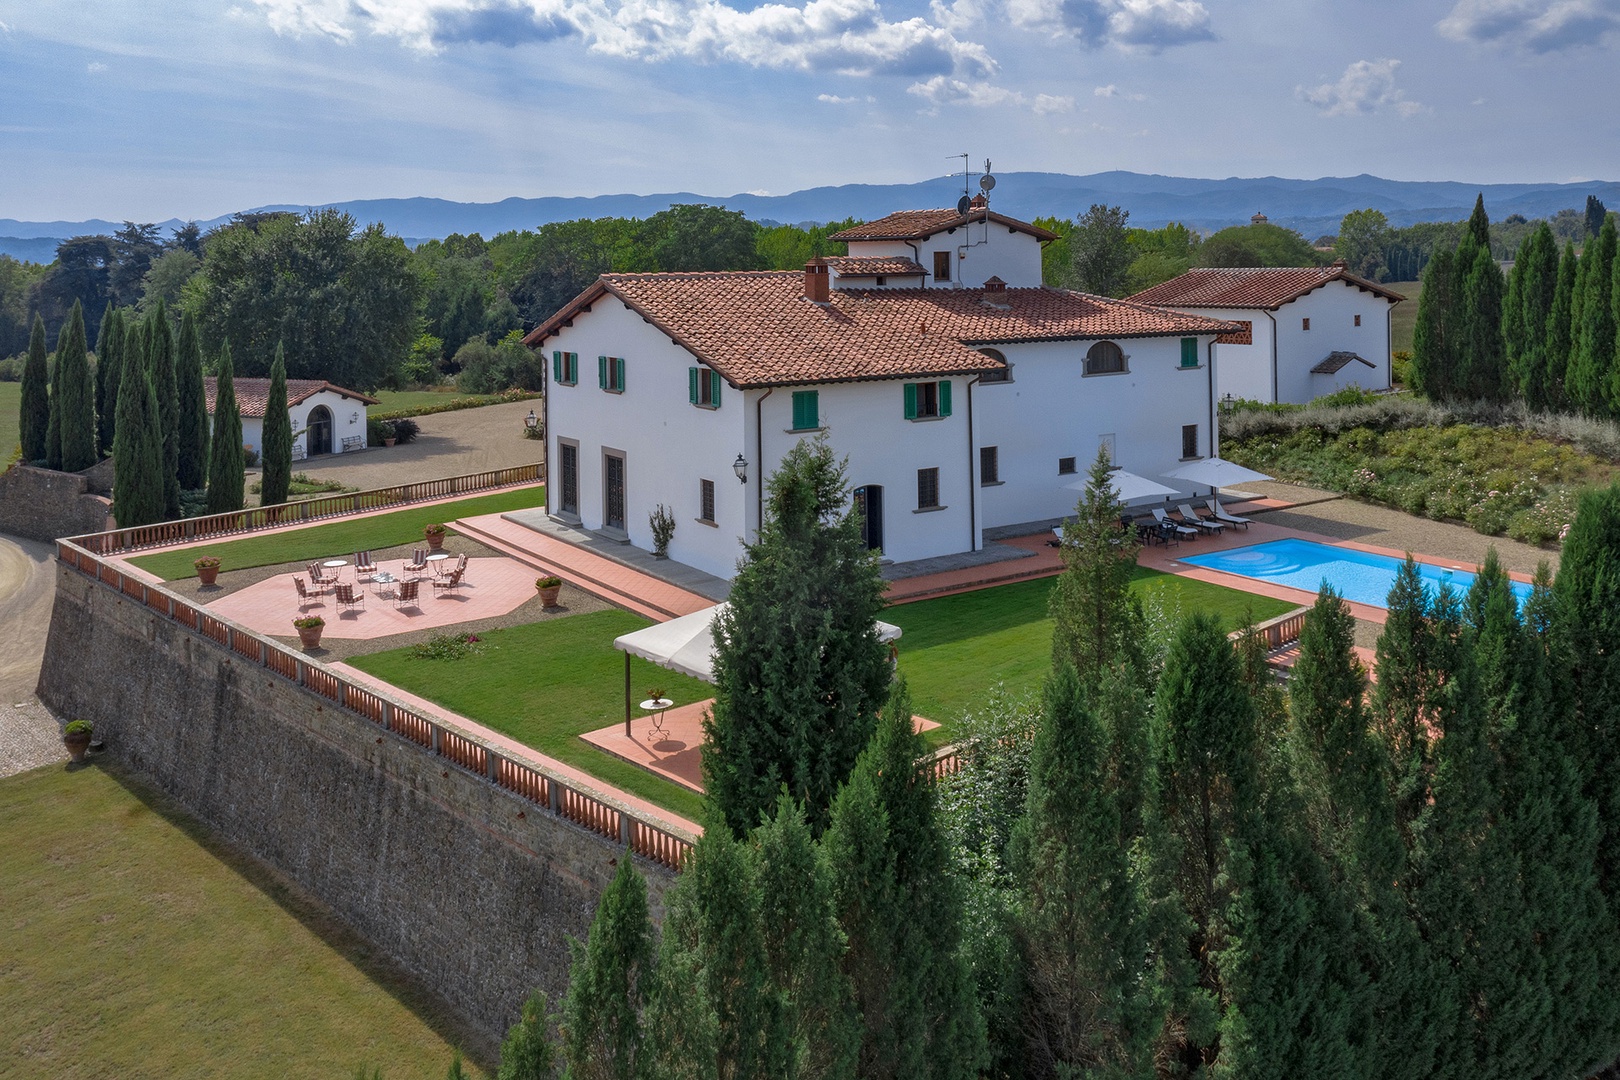 The estate is located in the coveted Arno Valley, between the towns of Reggello and Figline Valdarno